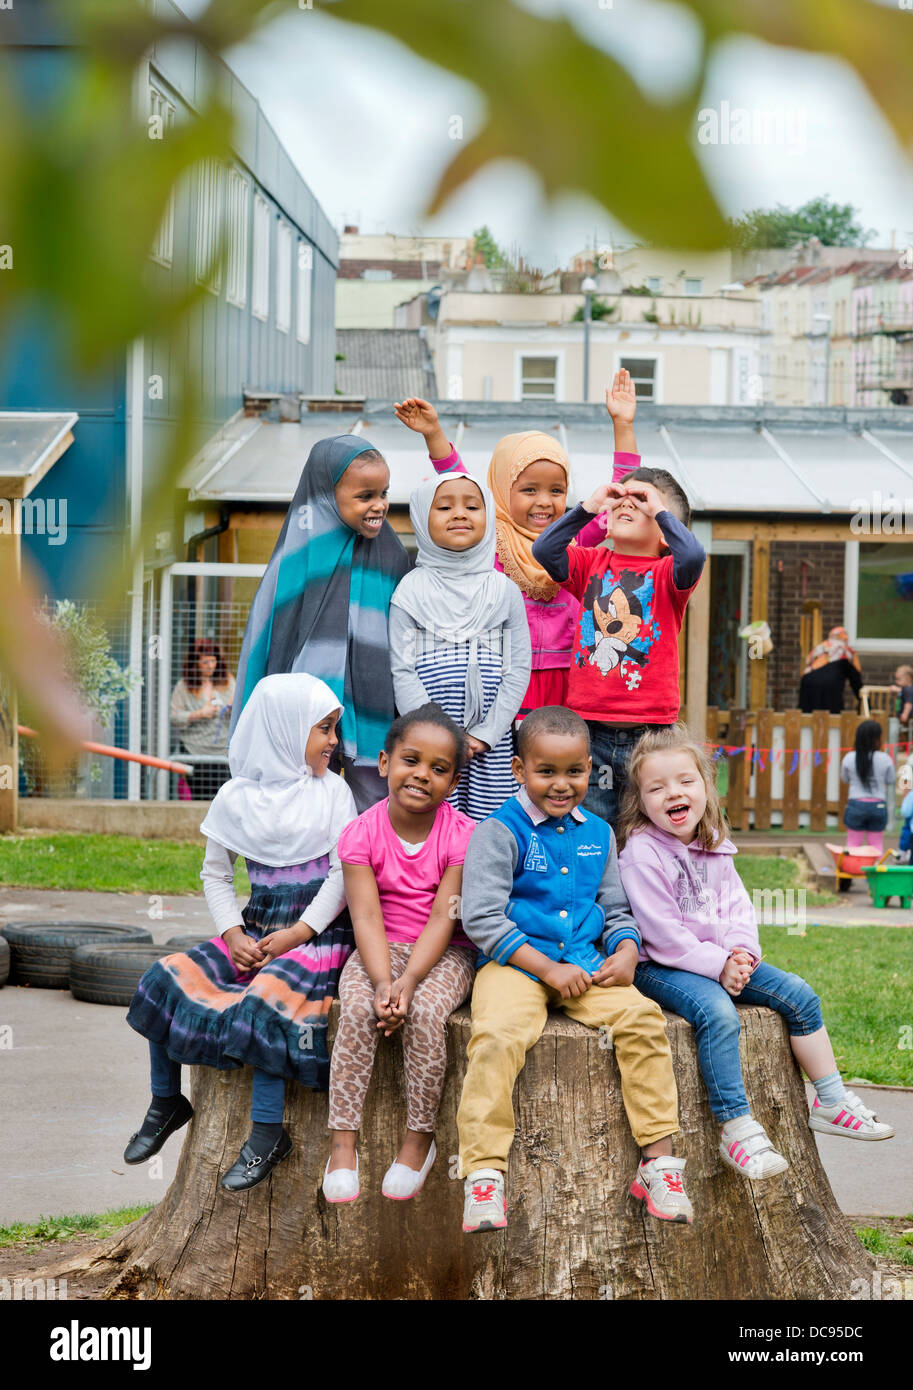 The St. Pauls Nursery School and Children's Centre, Bristol UK  - A culturally diverse group of children in the playground. Stock Photo